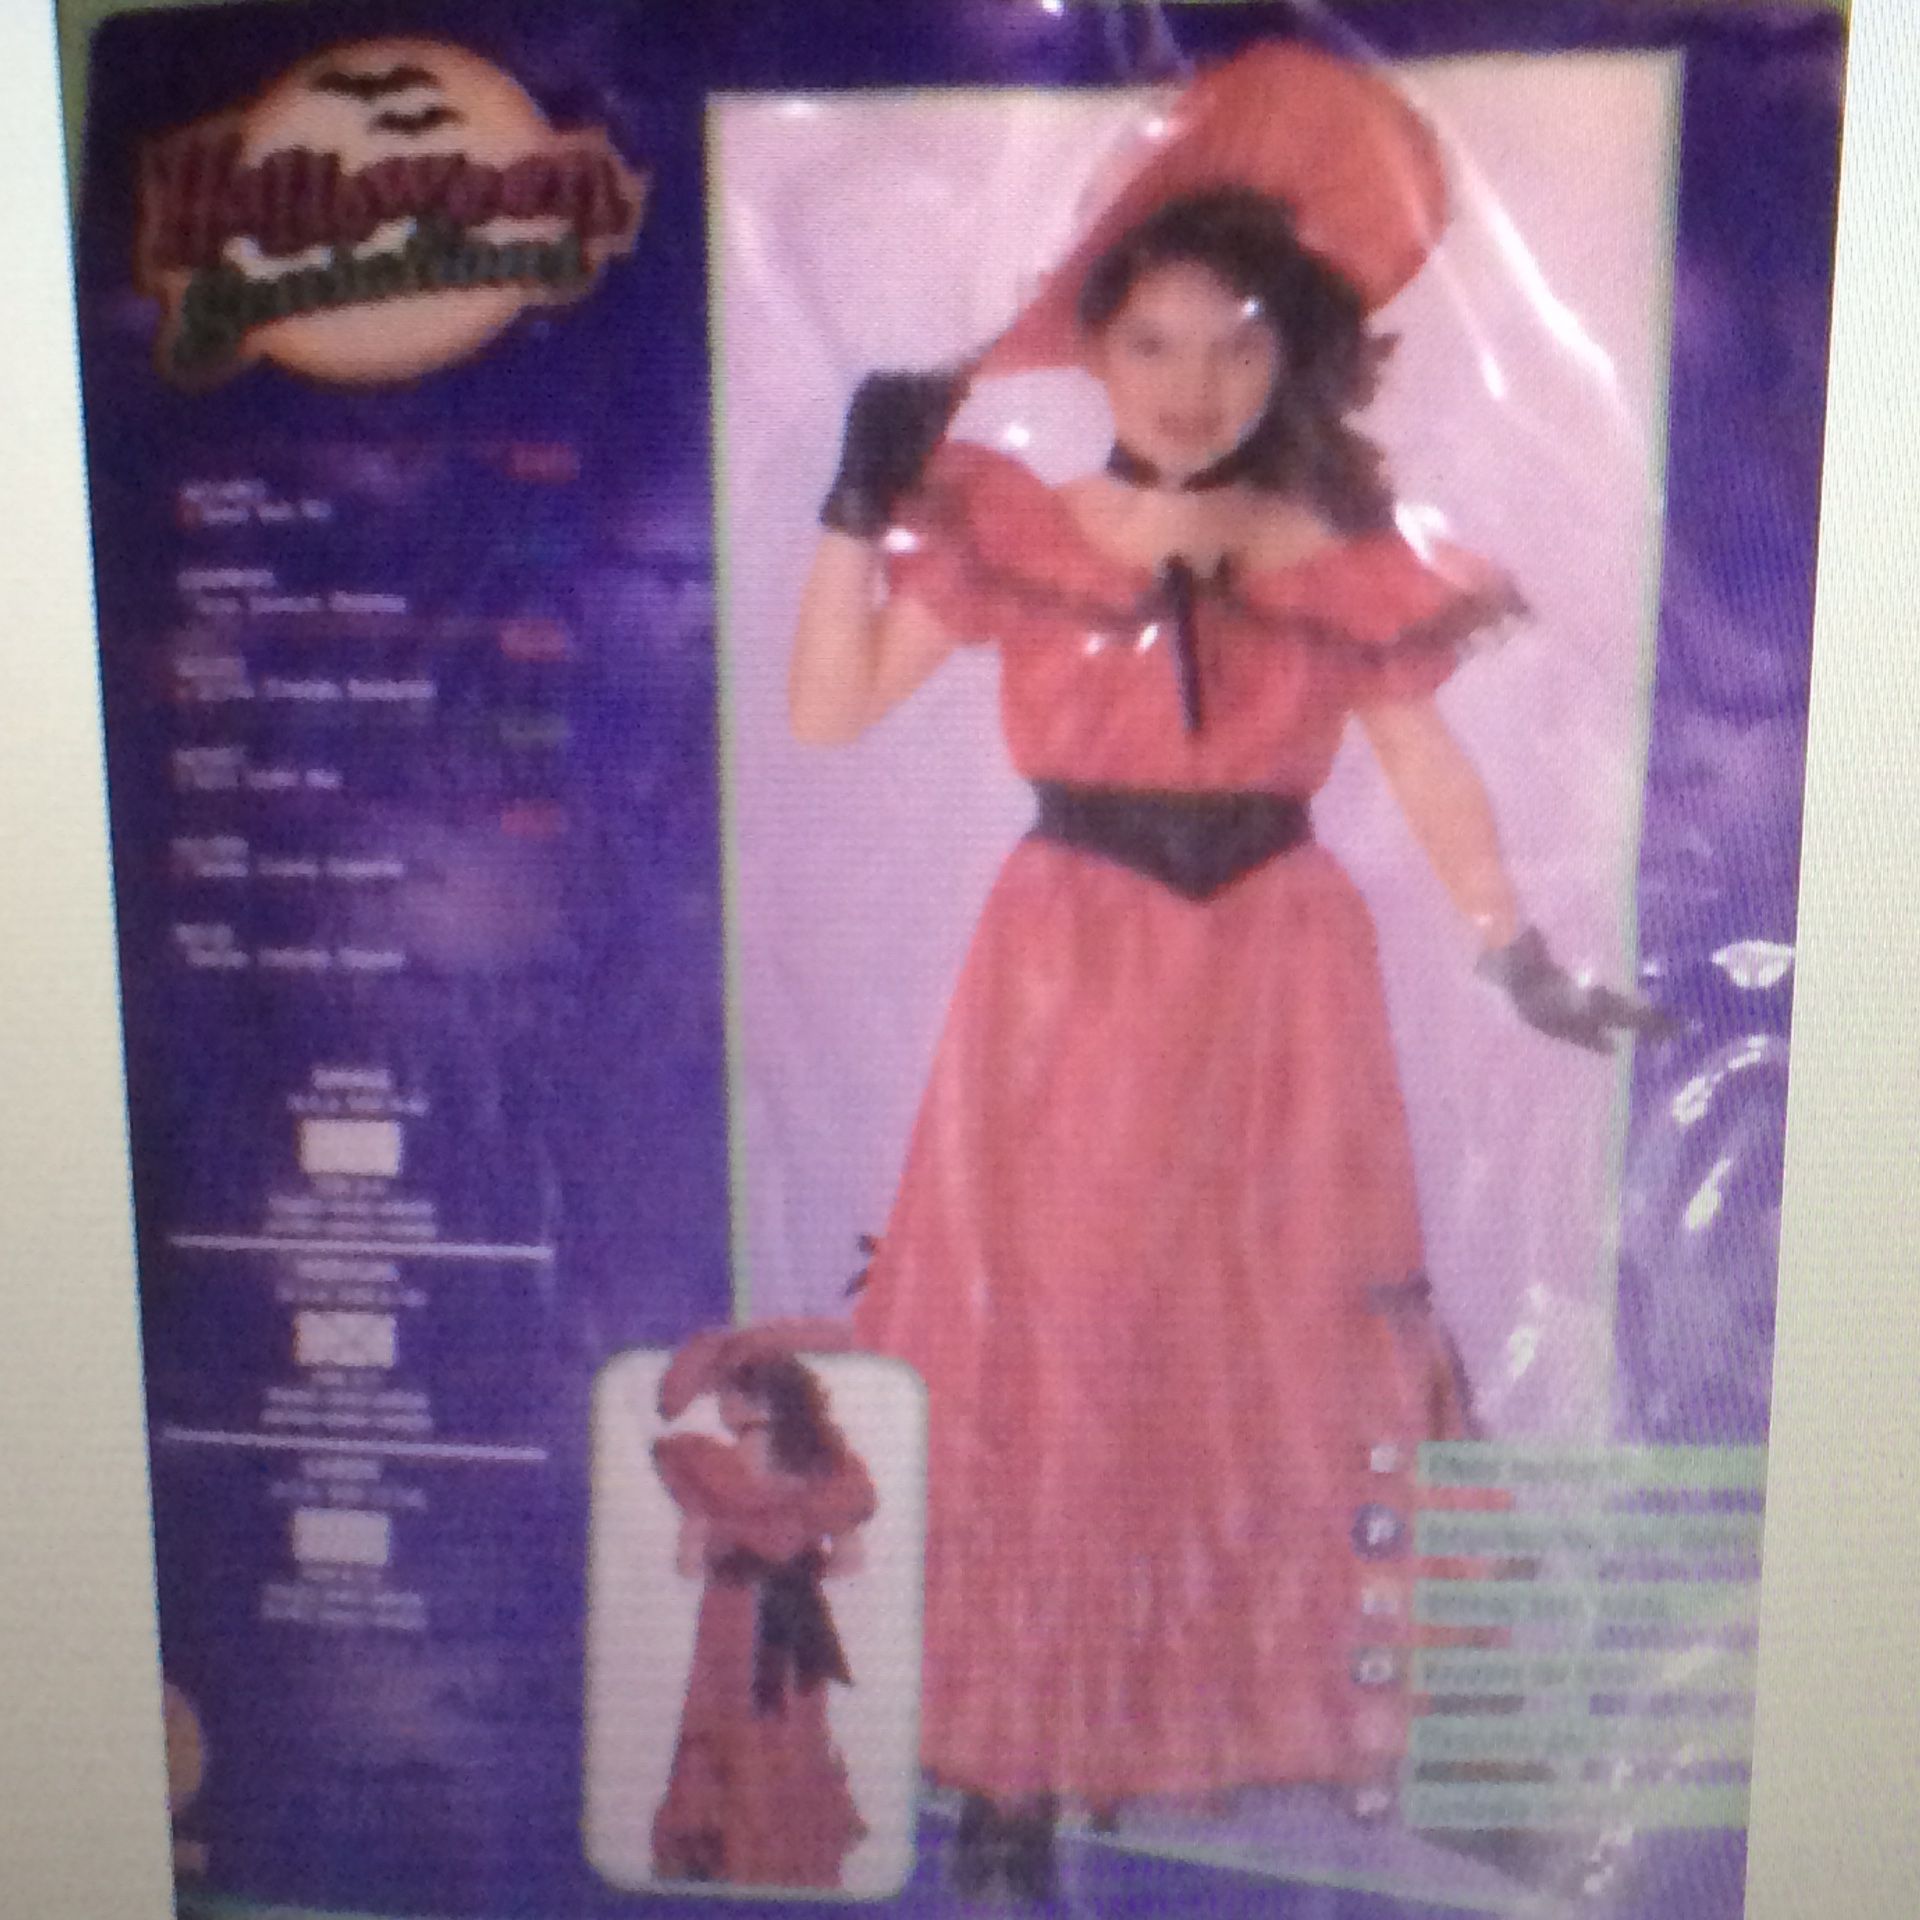 Halloween Costumes Southern Bell, Witch Devil, Royal Princes sizes 6-10 & 8-10 ea.$10